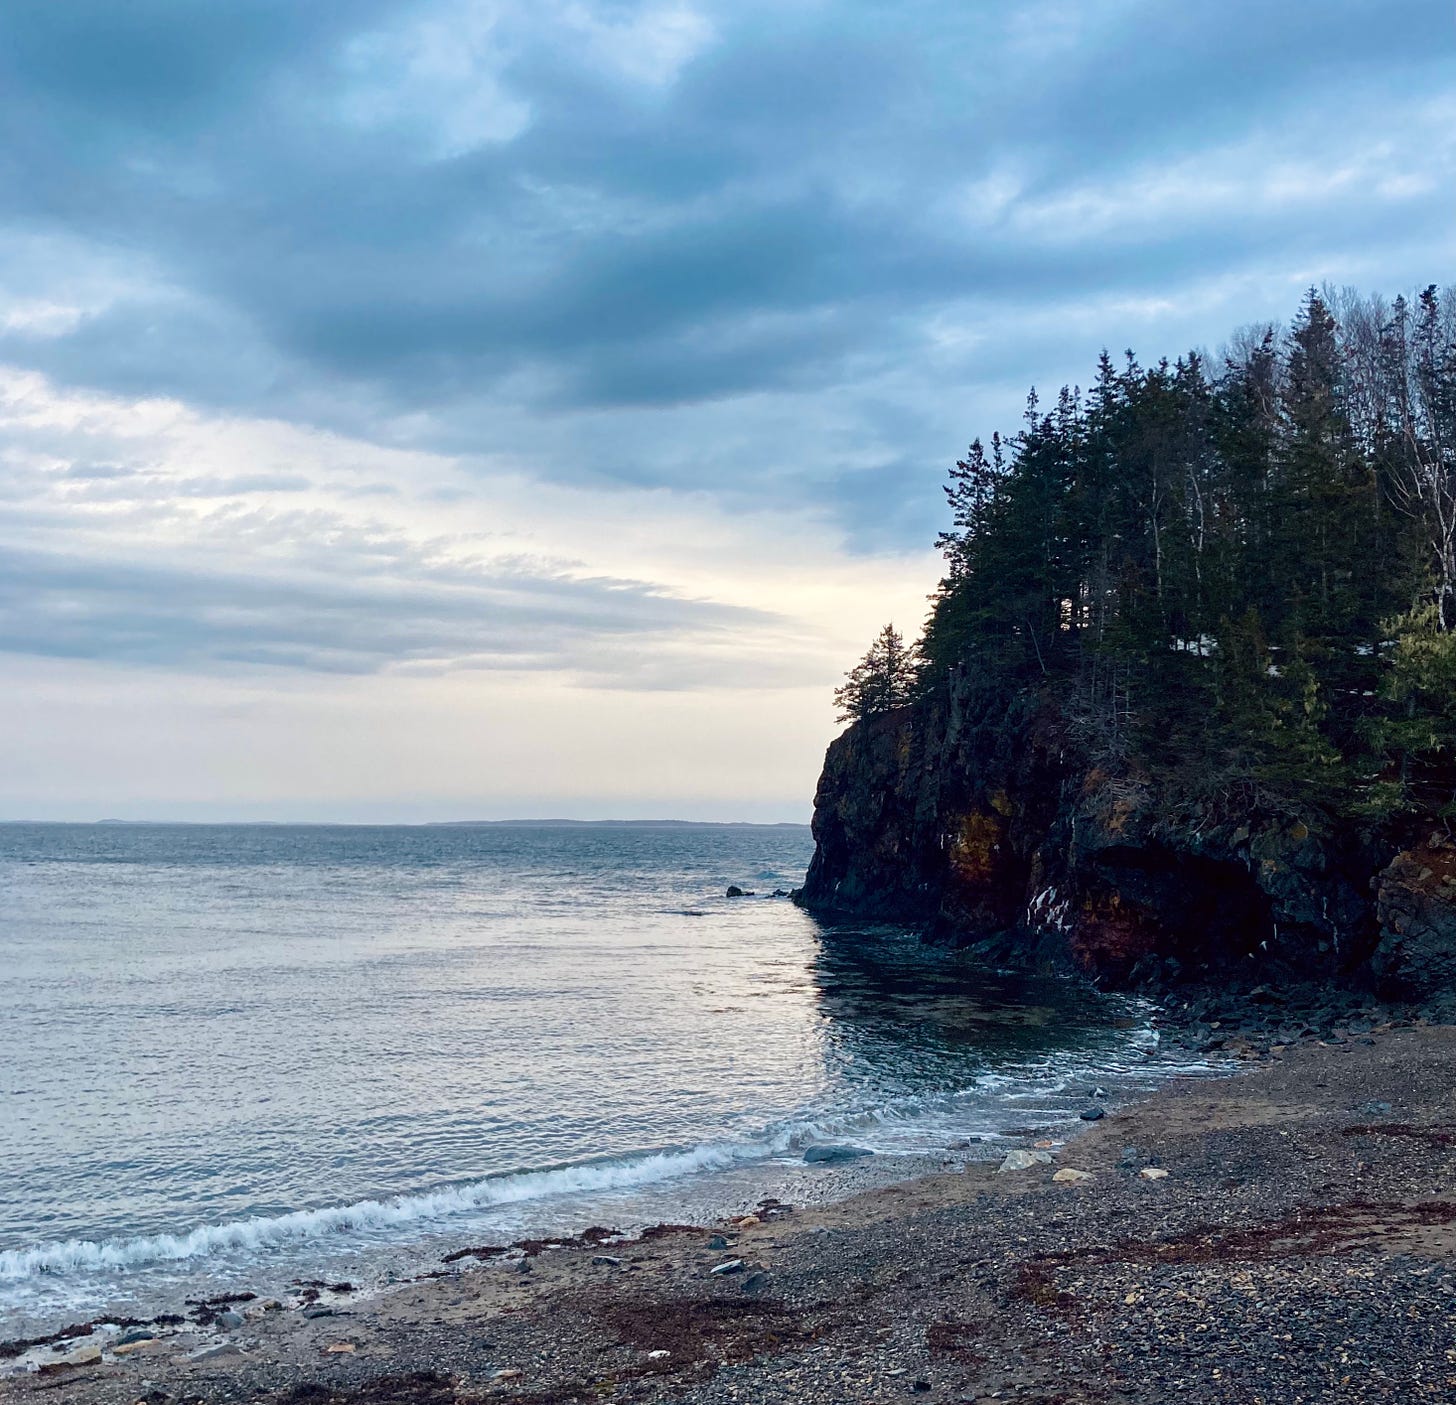 A rocky beach at sunset. The sky is overcast and illuminated. A cliff covered in evergreens juts out into the ocean from the right.